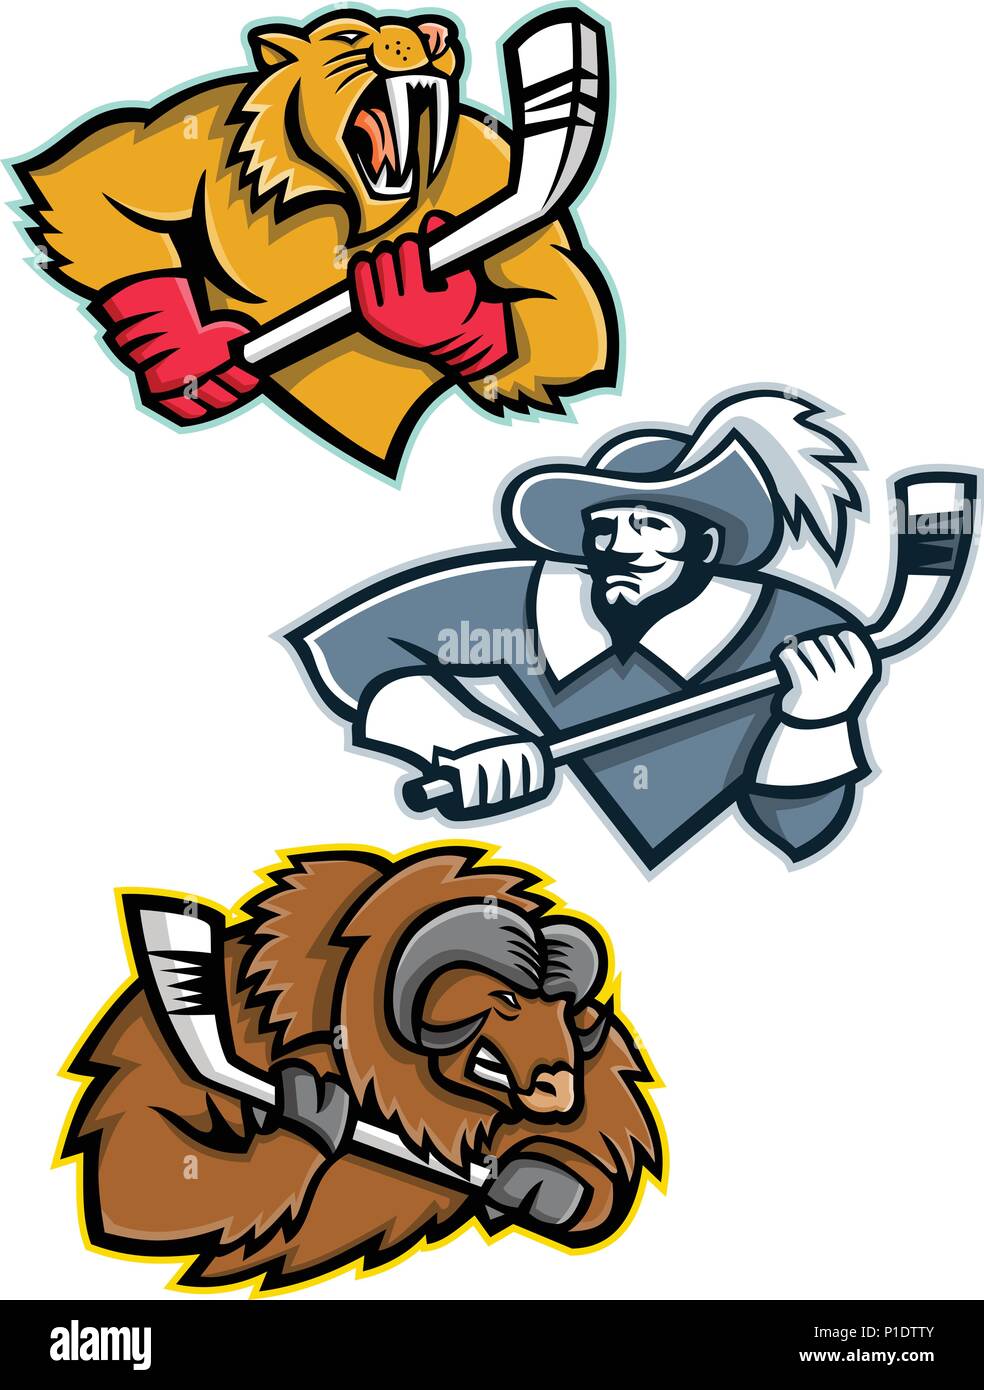 Mascot icon illustration set of ice hockey sporting mascots like the saber toothed tiger or sabre-toothed cat, musketeer or cavalier, musk ox or musko Stock Vector